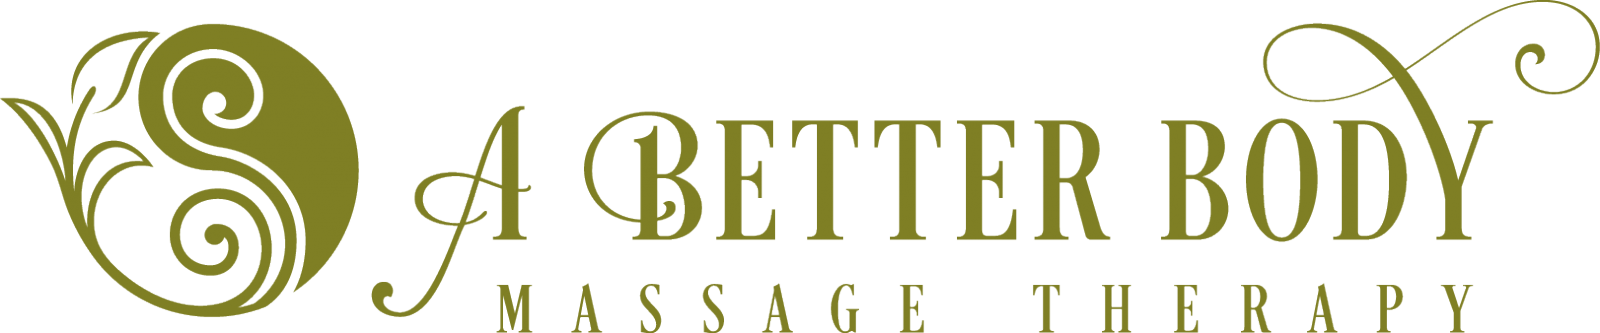 A Better Body Massage Therapy